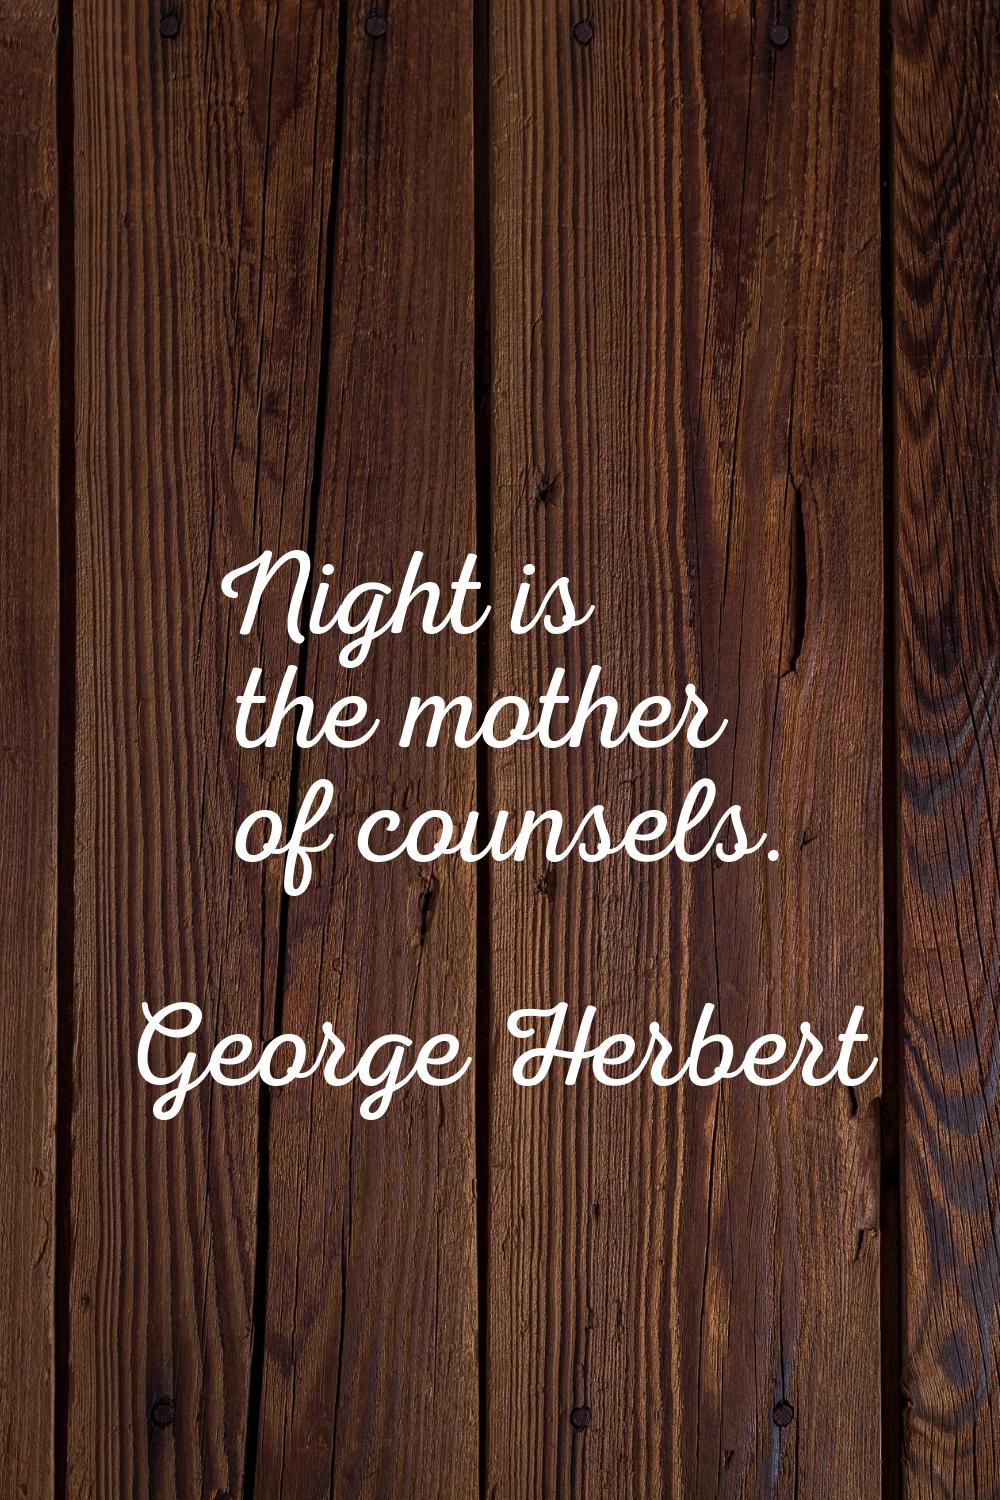 Night is the mother of counsels.